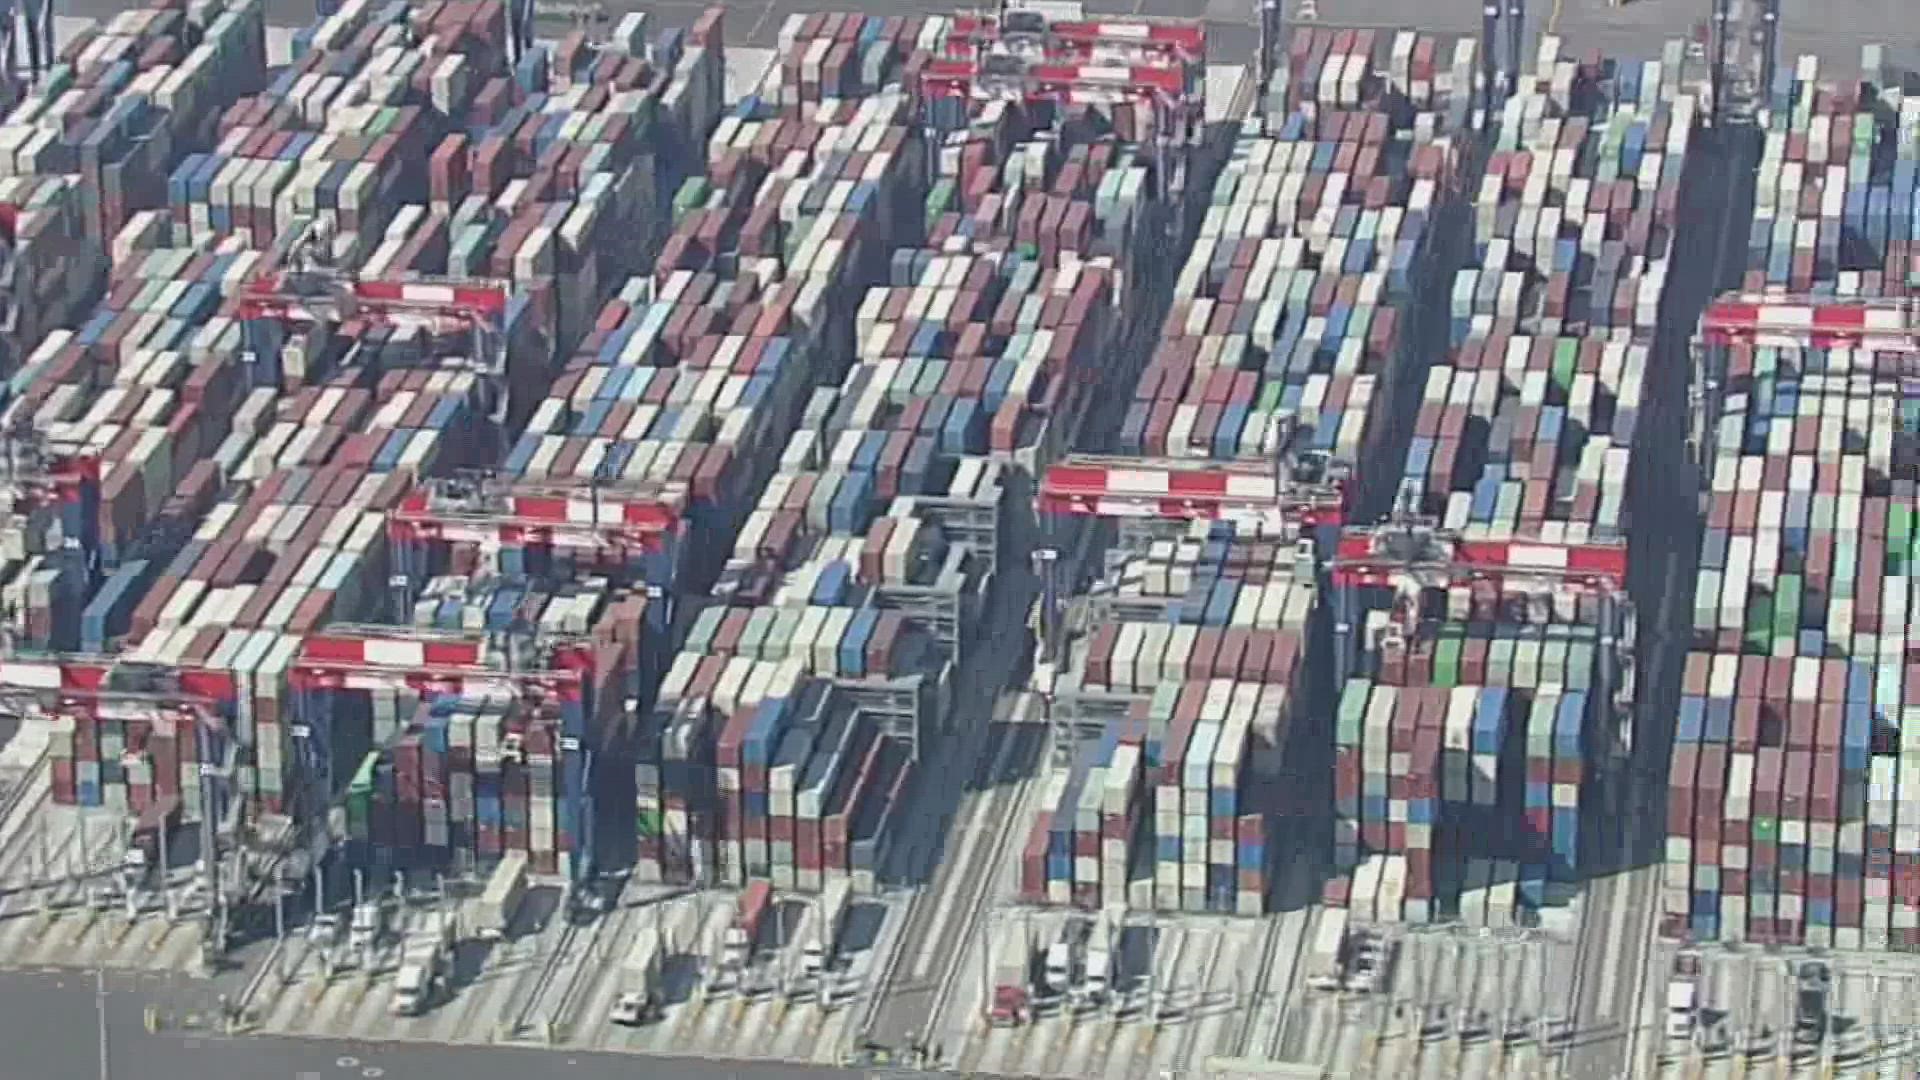 Labor shortages and traffic jams at ports in the U.S. area leading to consumer frustration.